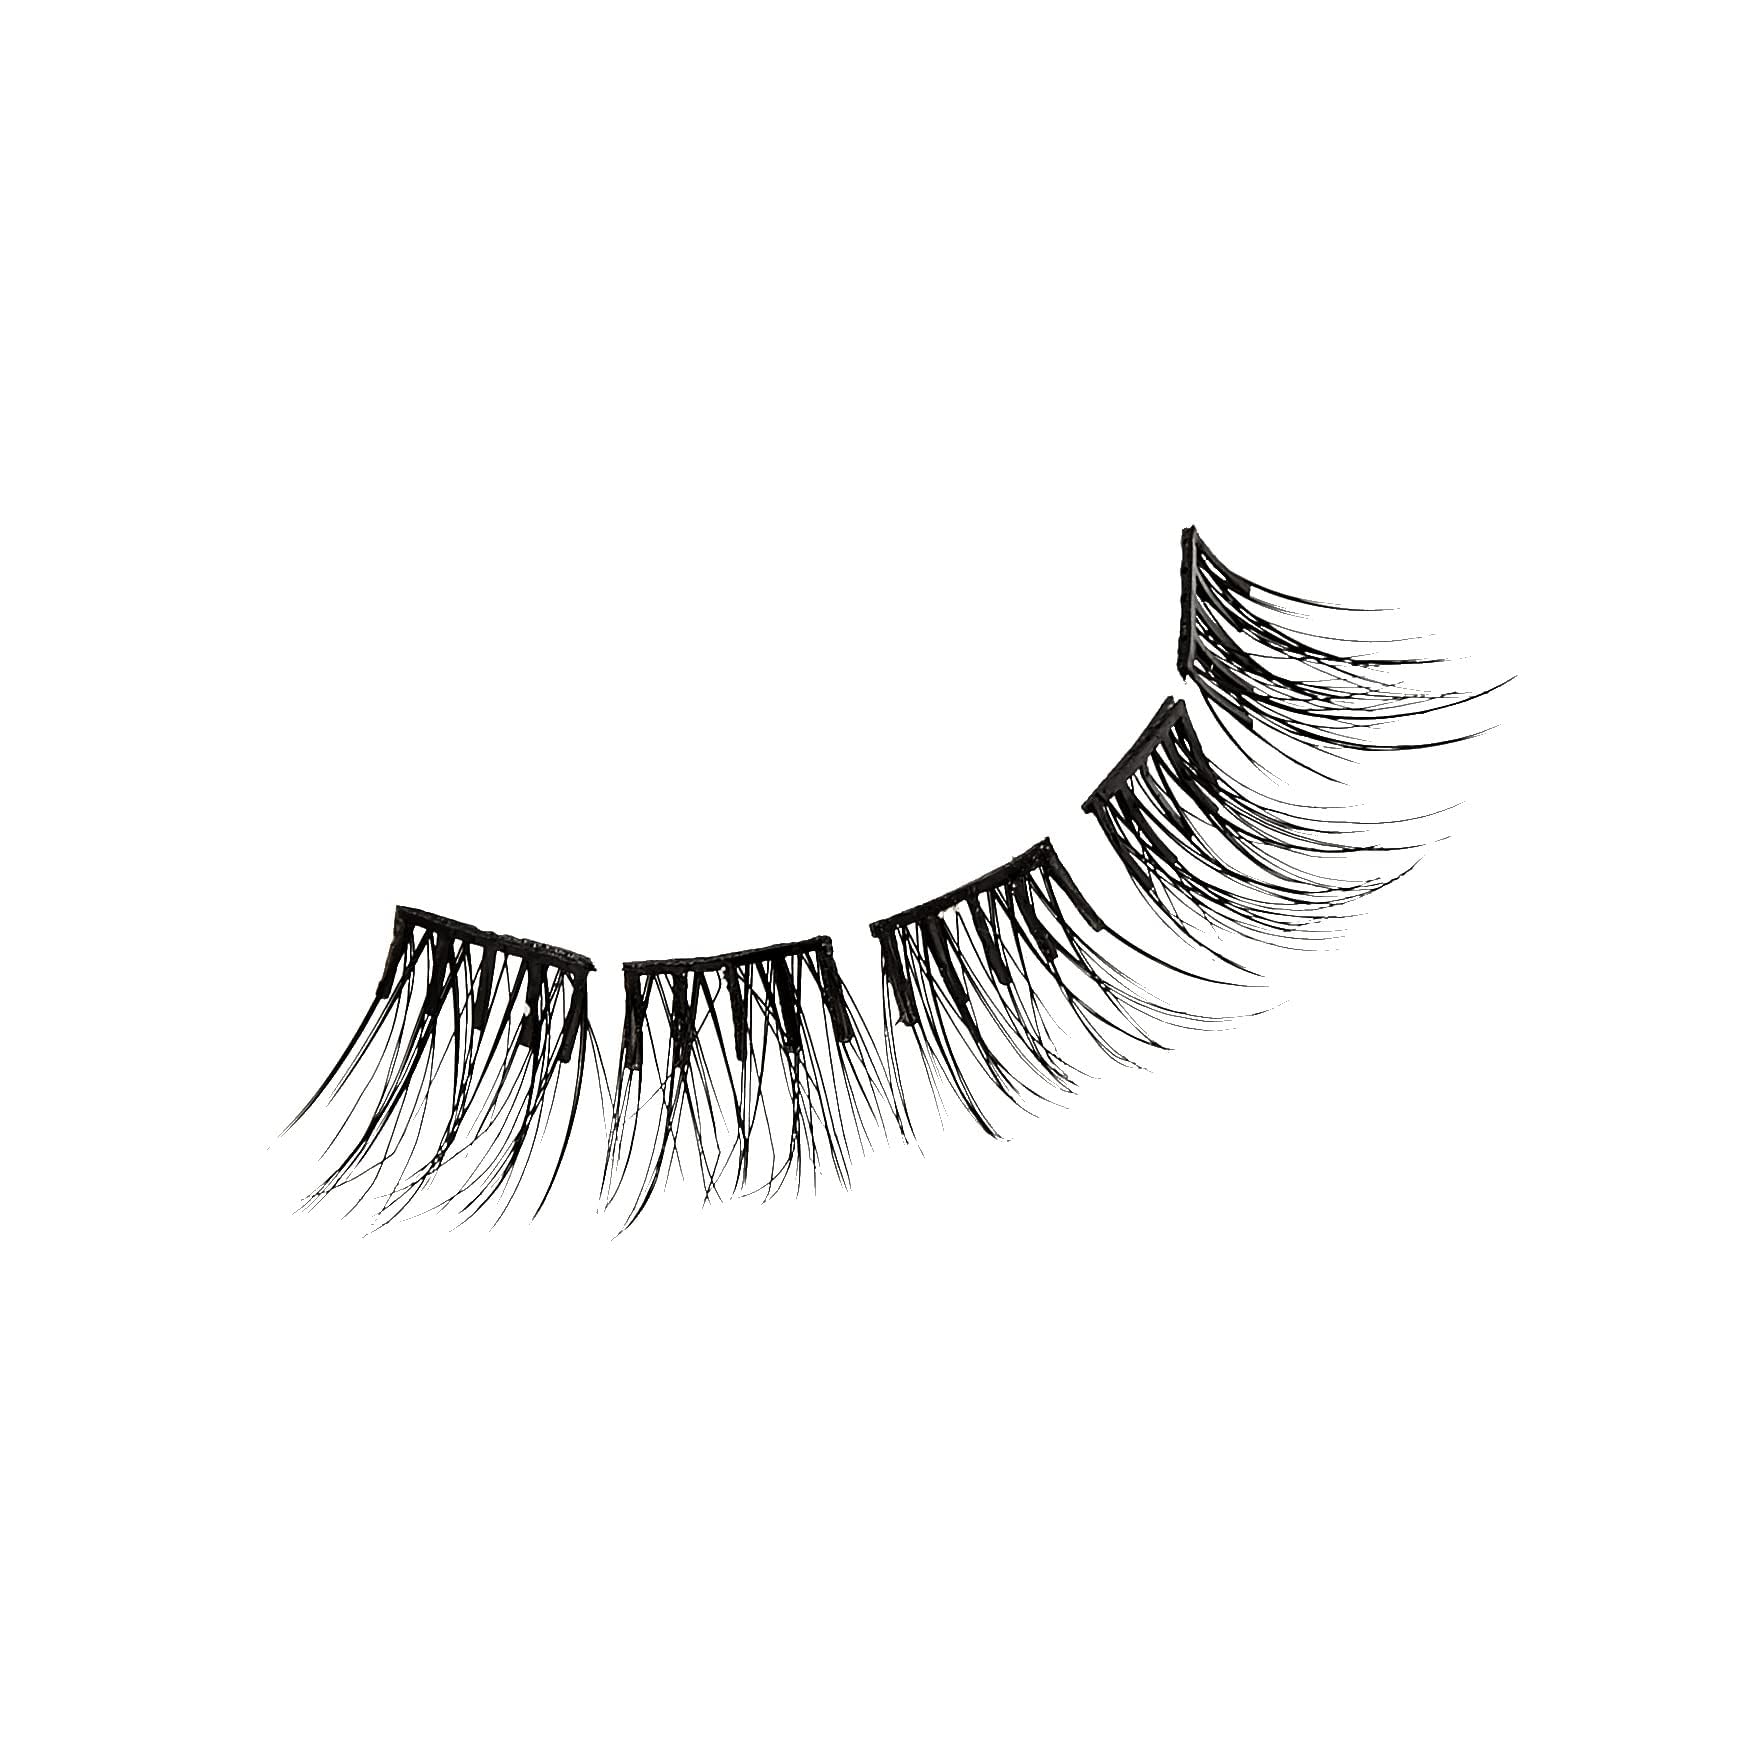 KISS imPRESS Press-On Falsies Eyelash Clusters Kit, Natural, Black, No Glue Needed, Fuss Free, Invisible Band, Natural, 24 Hours, No Damage, No Sticky Residue, Flawless, Quick & Easy | 20 Clusters